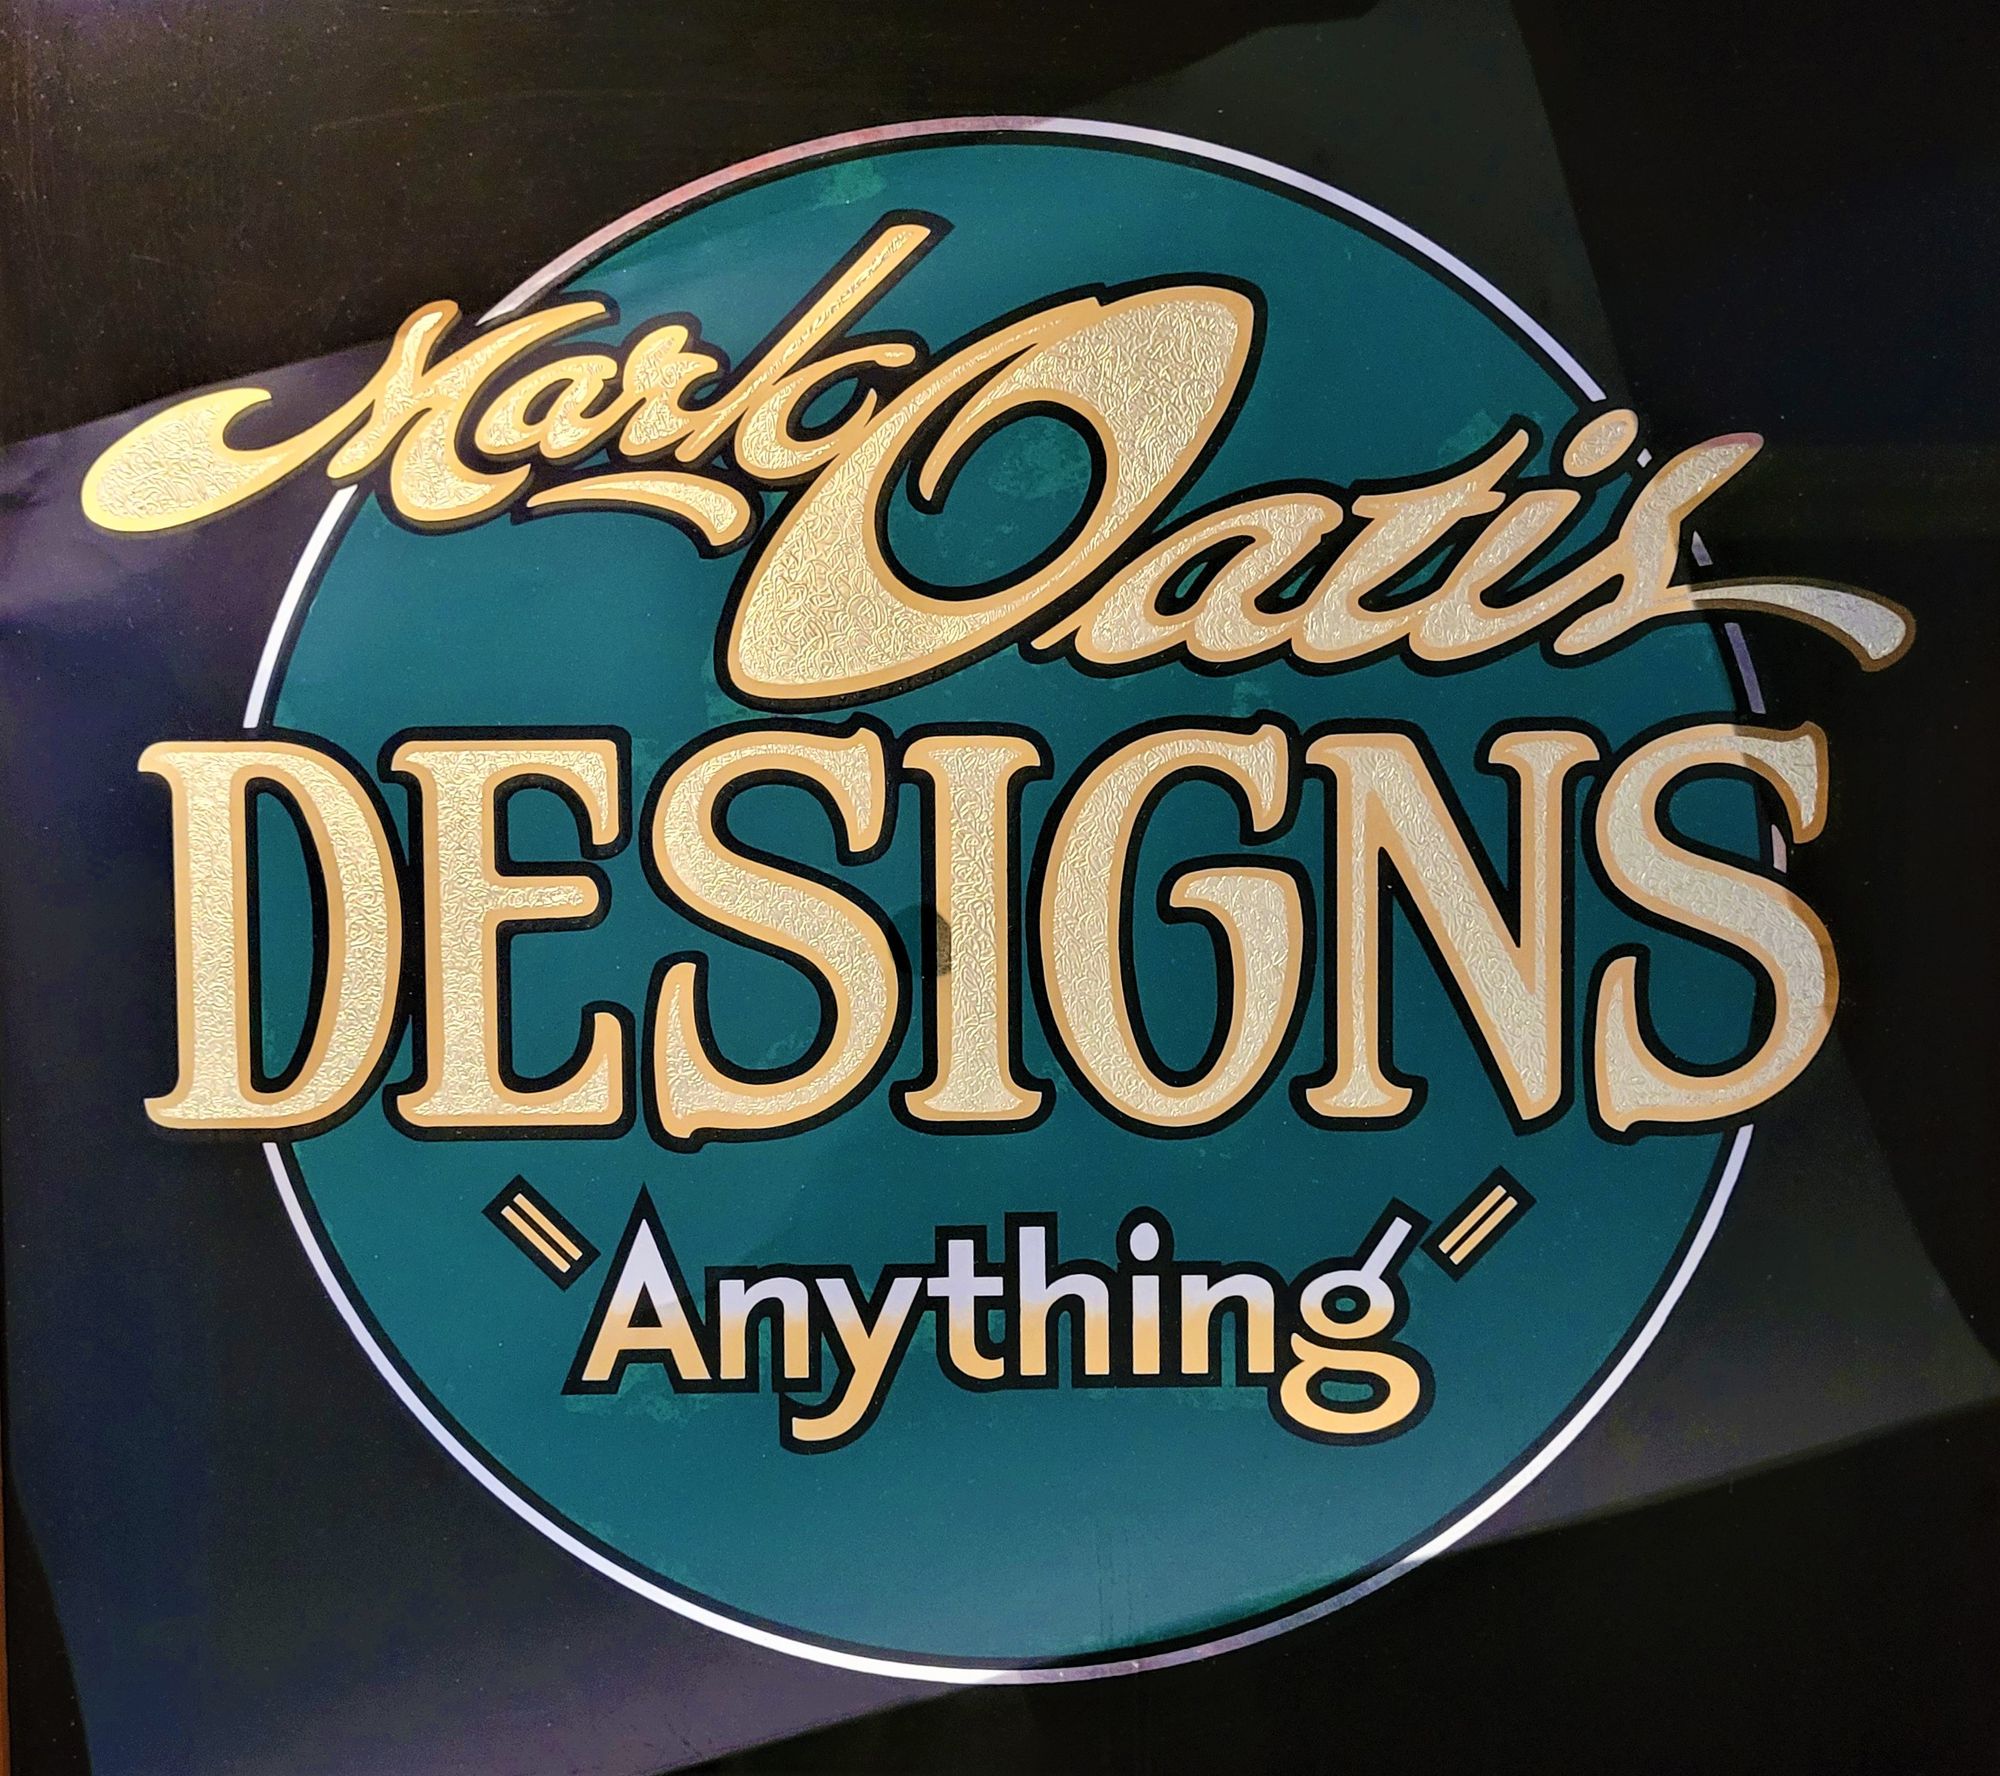 Hand-lettered and gilded glass panel reading 'Mark Oatis Designs "Anything"'.